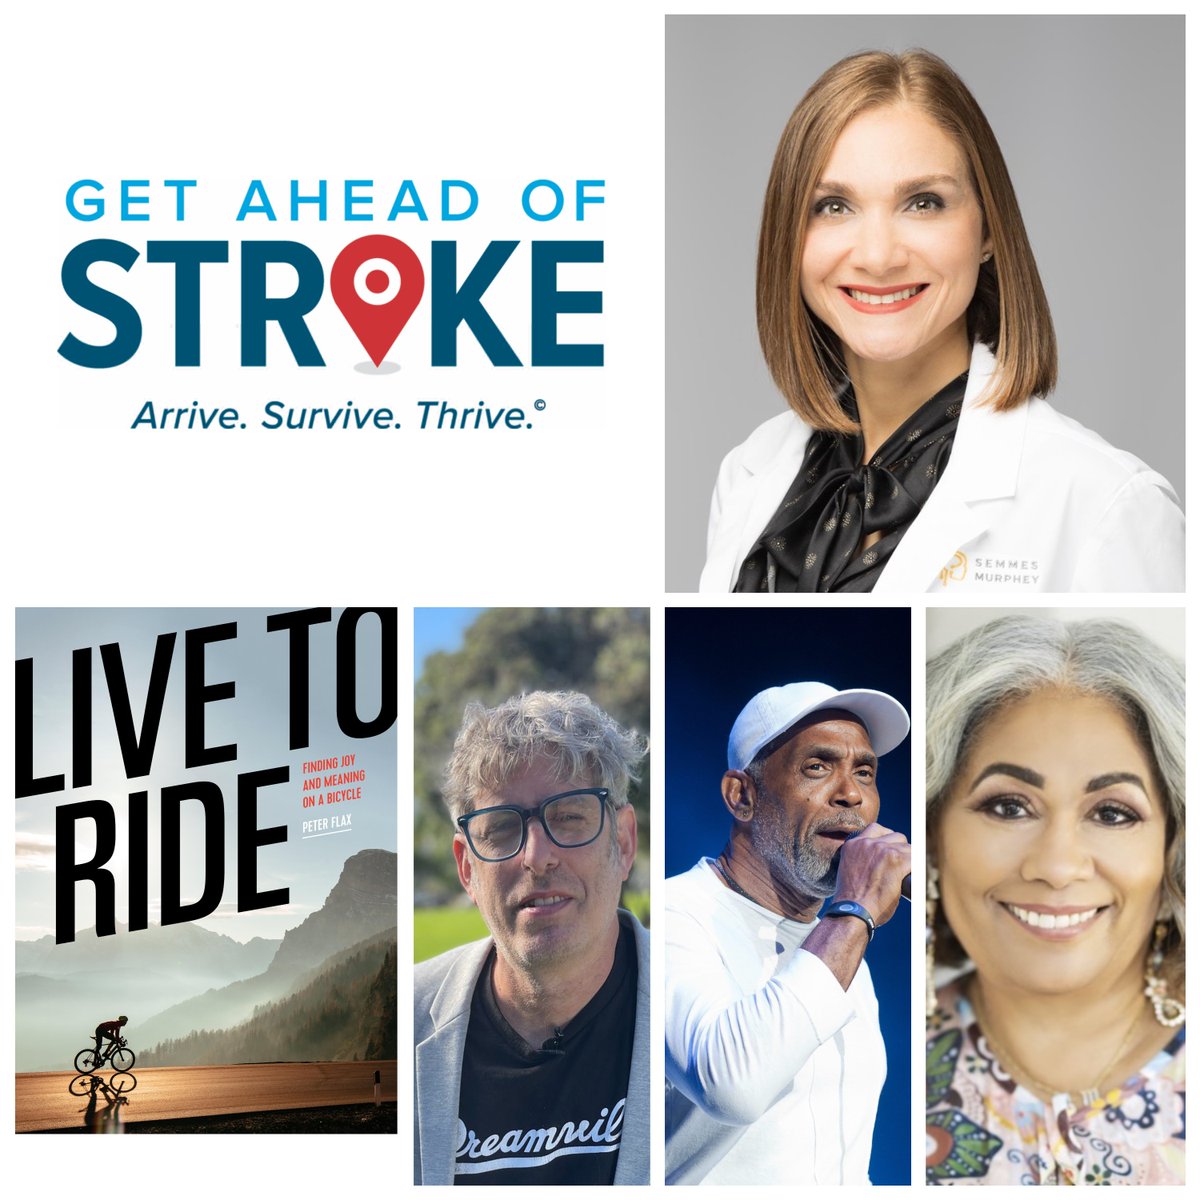 This weekend on “The Weekend with Ed Kalegi”... -Dr. Violiza Inoa on surviving stroke and Get Ahead of Stroke @survivestroke, Peter Flax @Pflax1 on his book “Live to Ride,” @DyanaWilliams on a Philadelphia street naming celebration for R&B legend Frankie Beverly, and much more!